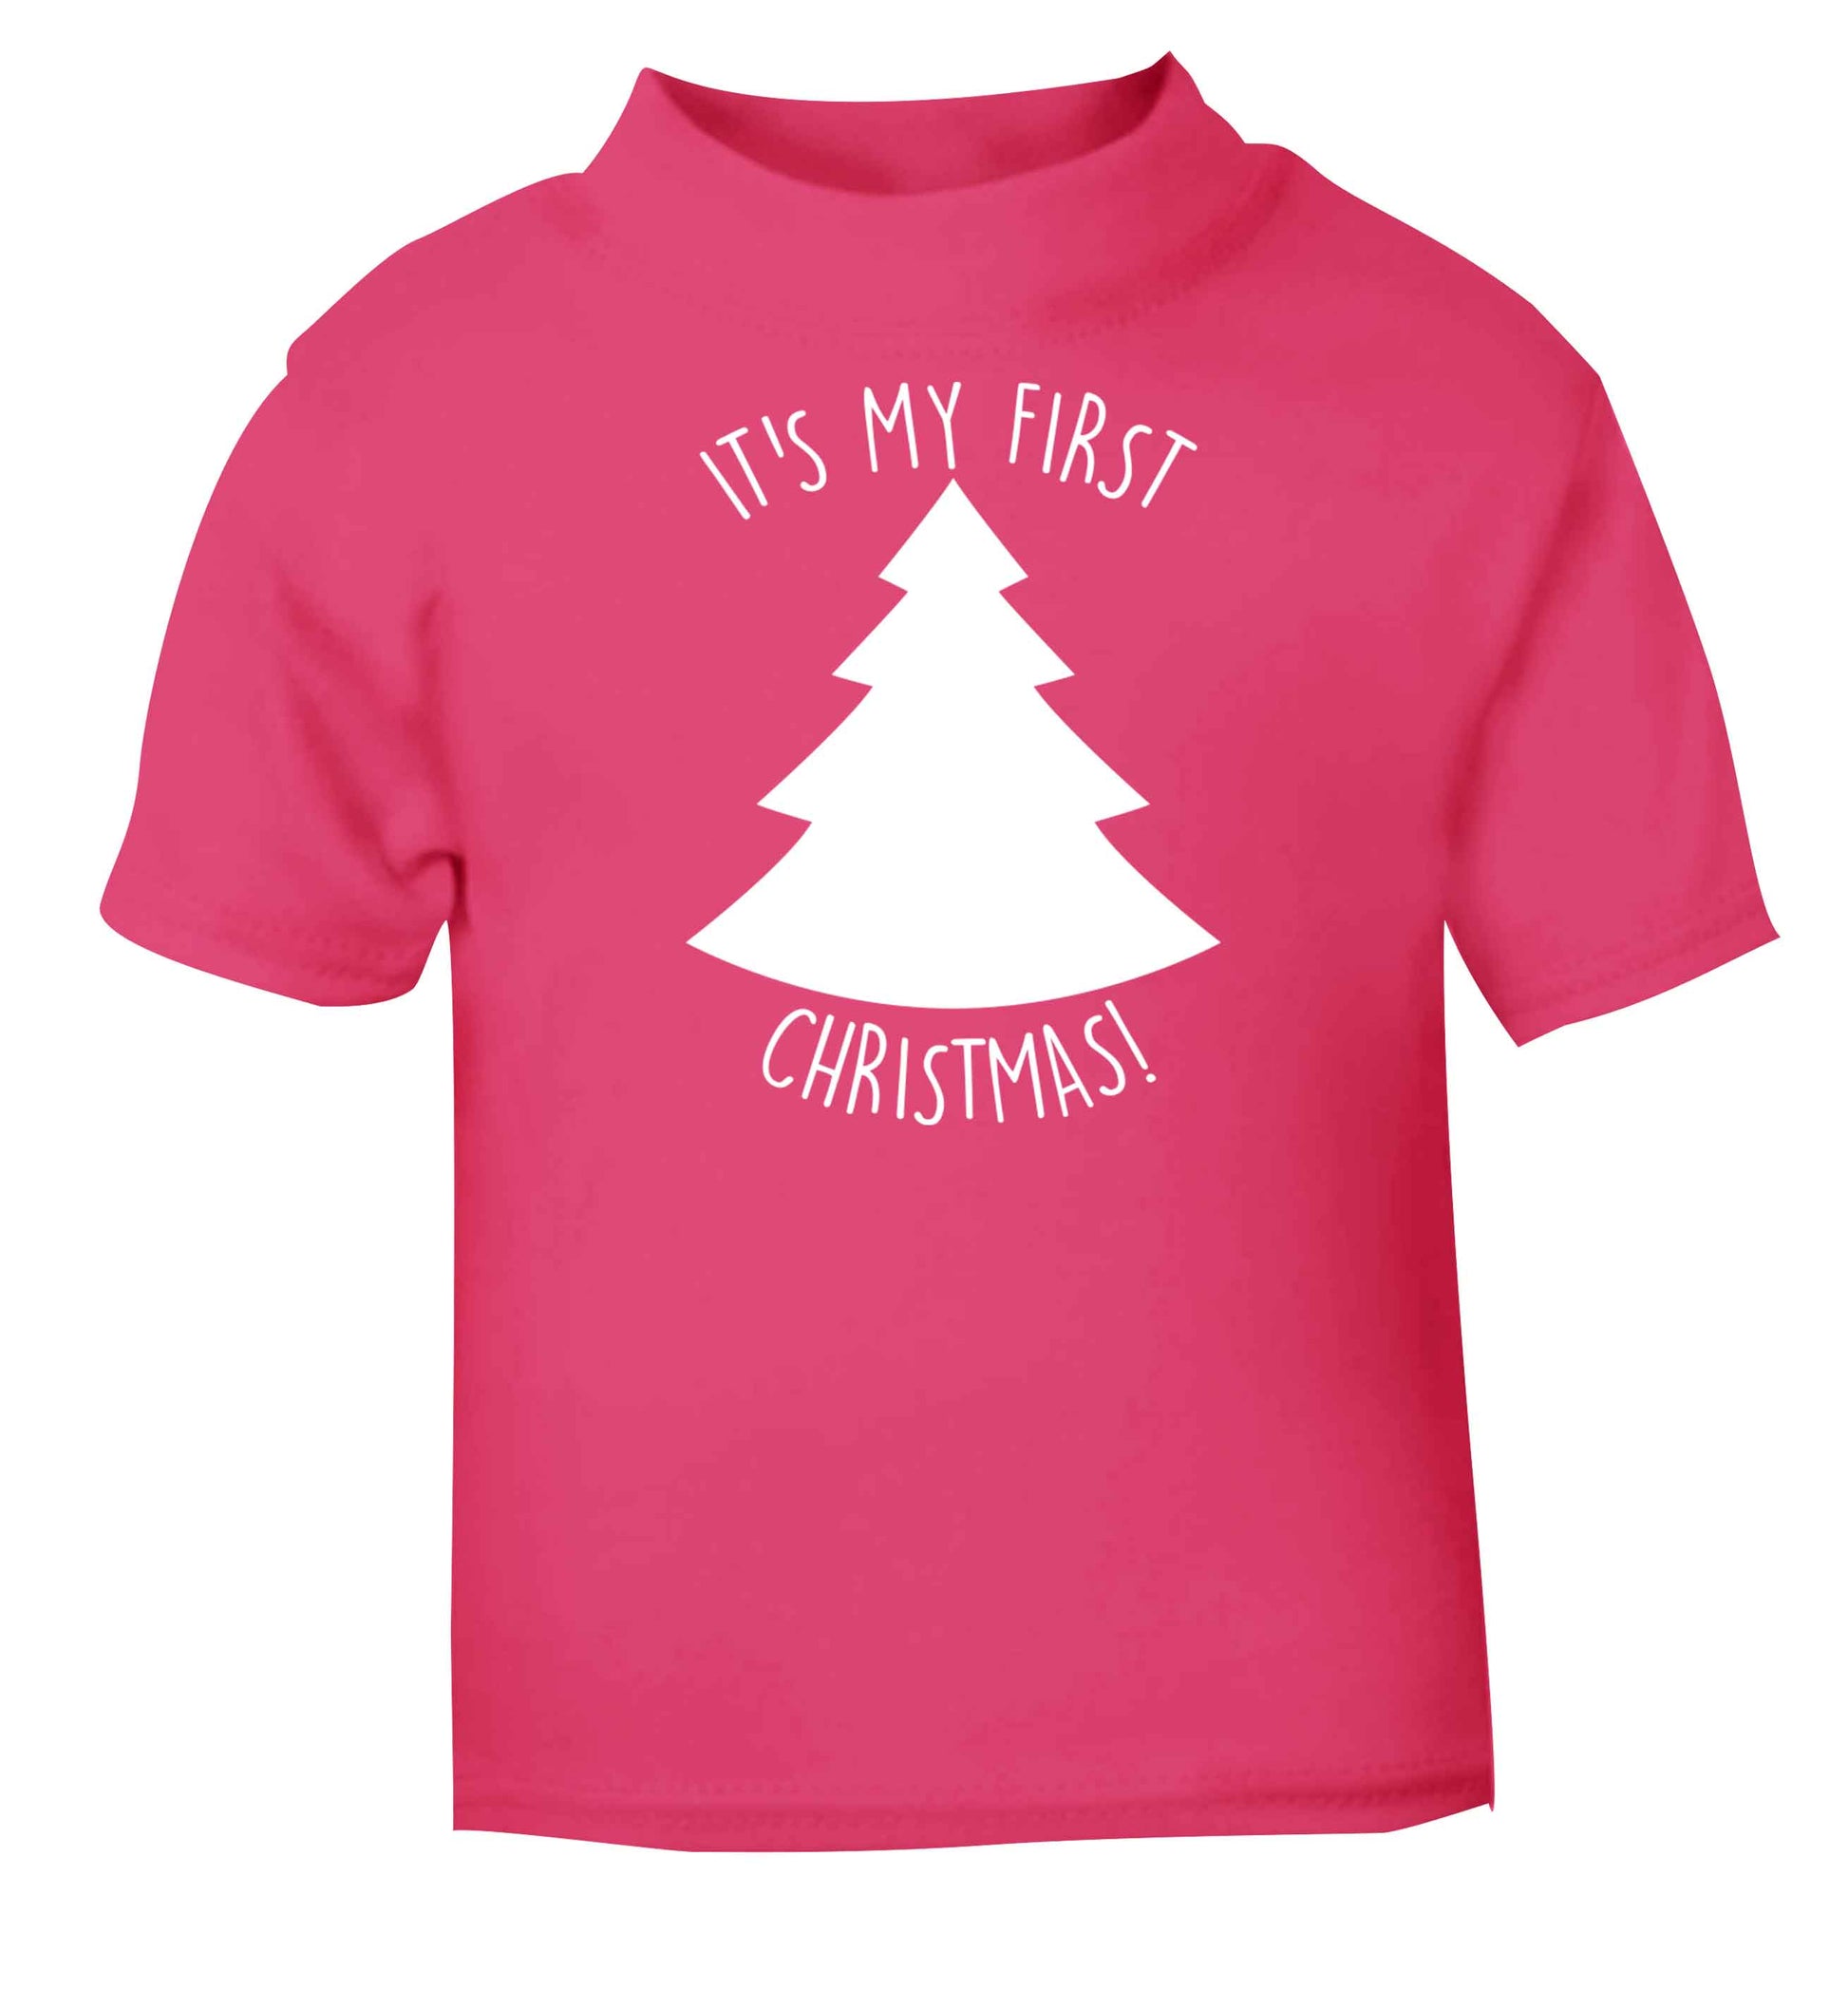 It's my first Christmas - tree pink baby toddler Tshirt 2 Years